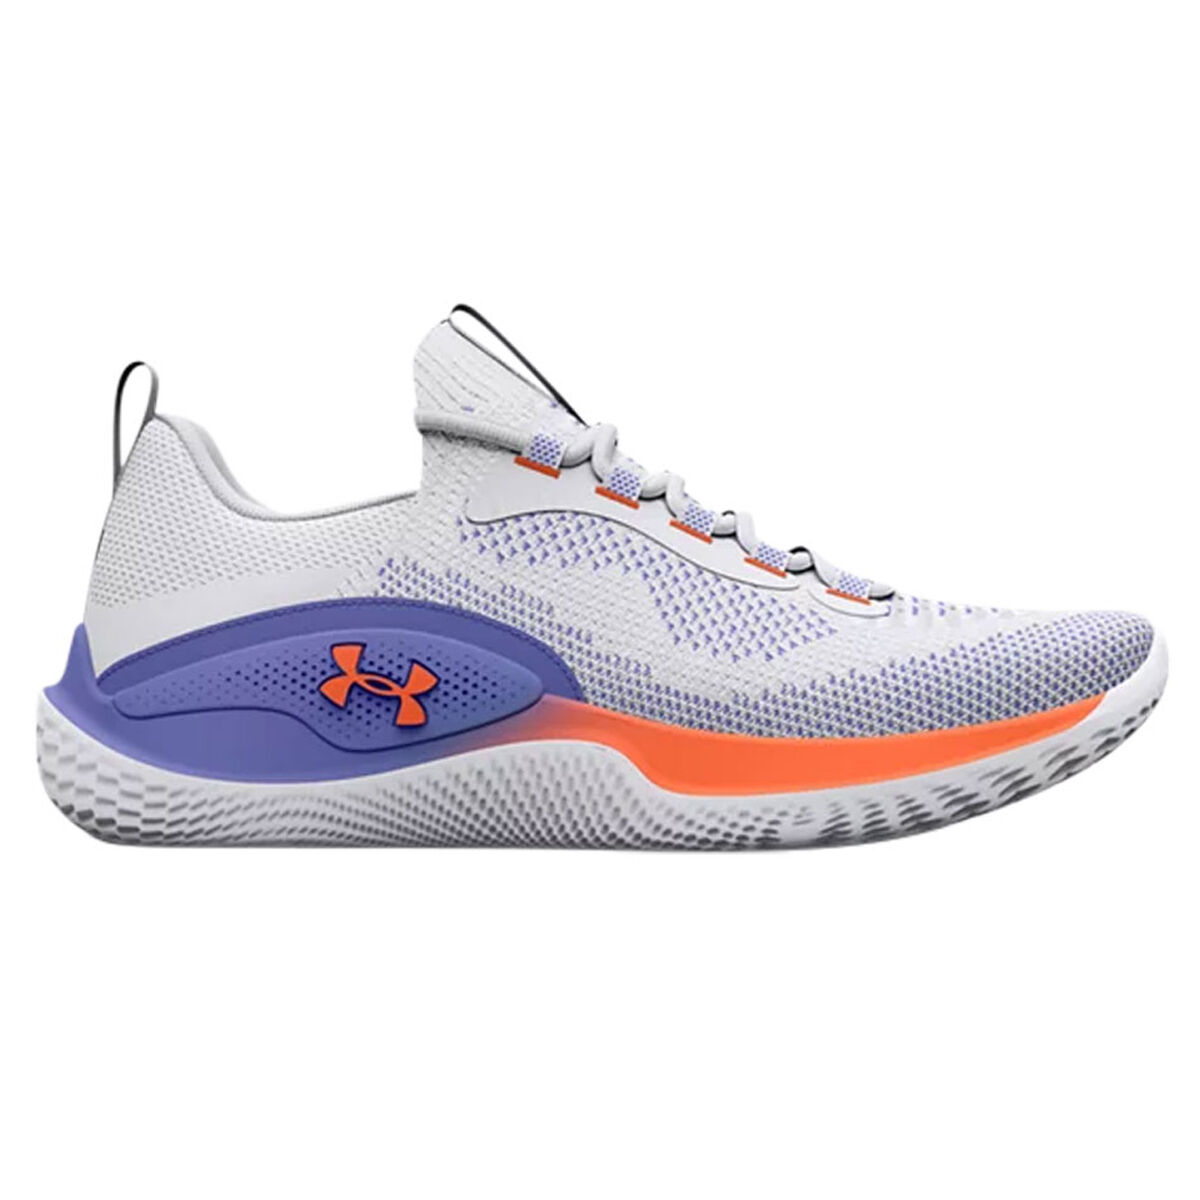 Under Armour Flow Dynamic Womens Training Shoes | Rebel Sport